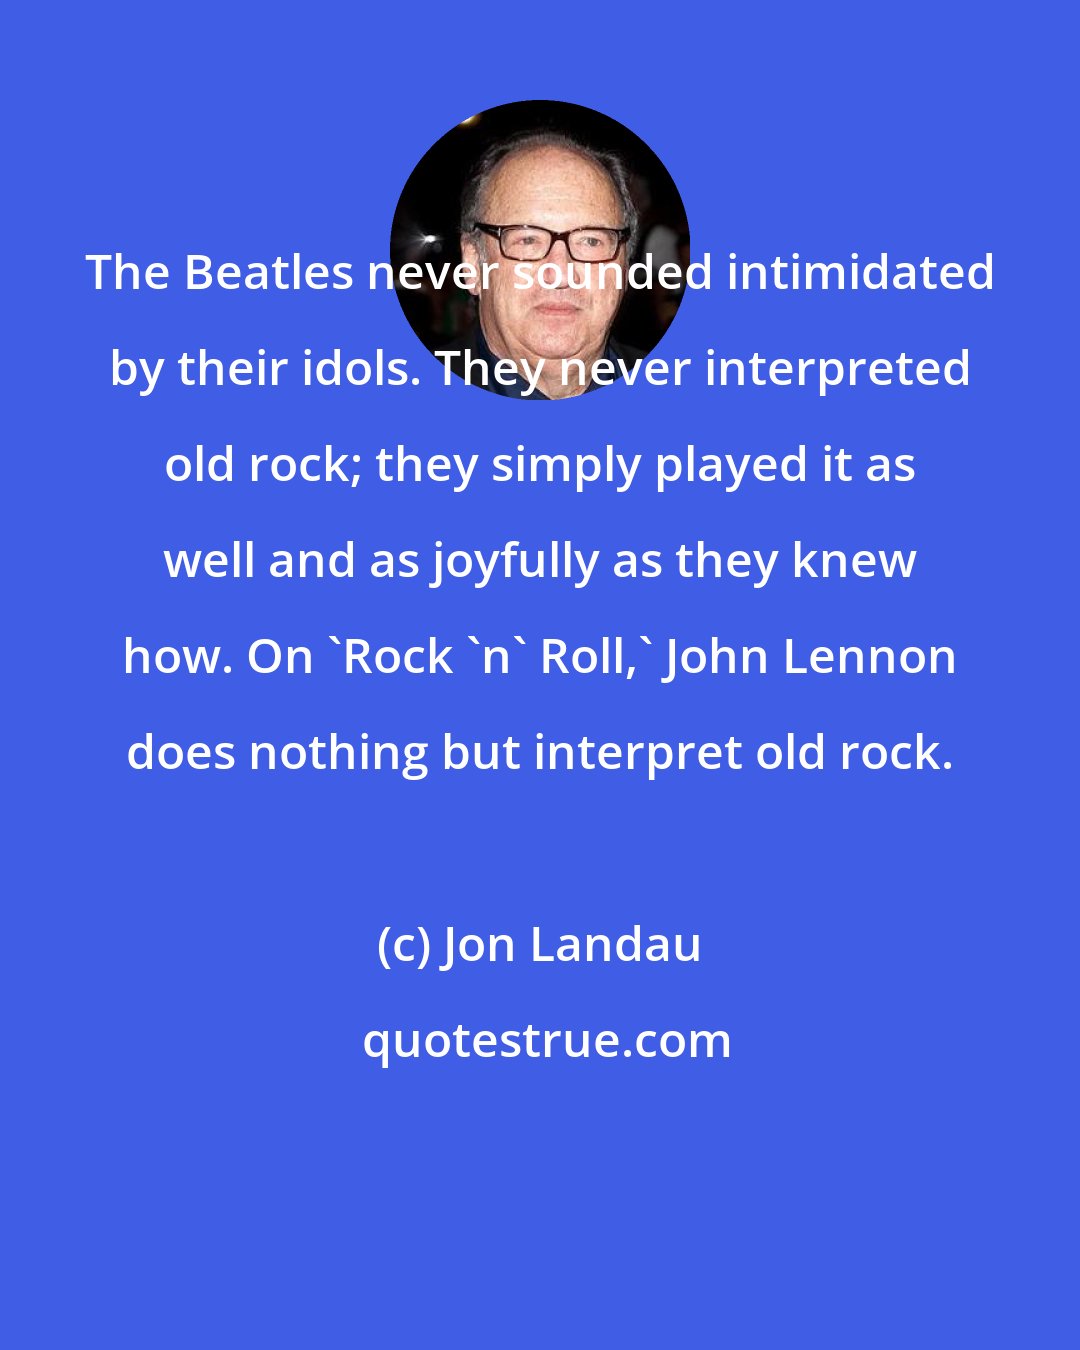 Jon Landau: The Beatles never sounded intimidated by their idols. They never interpreted old rock; they simply played it as well and as joyfully as they knew how. On 'Rock 'n' Roll,' John Lennon does nothing but interpret old rock.